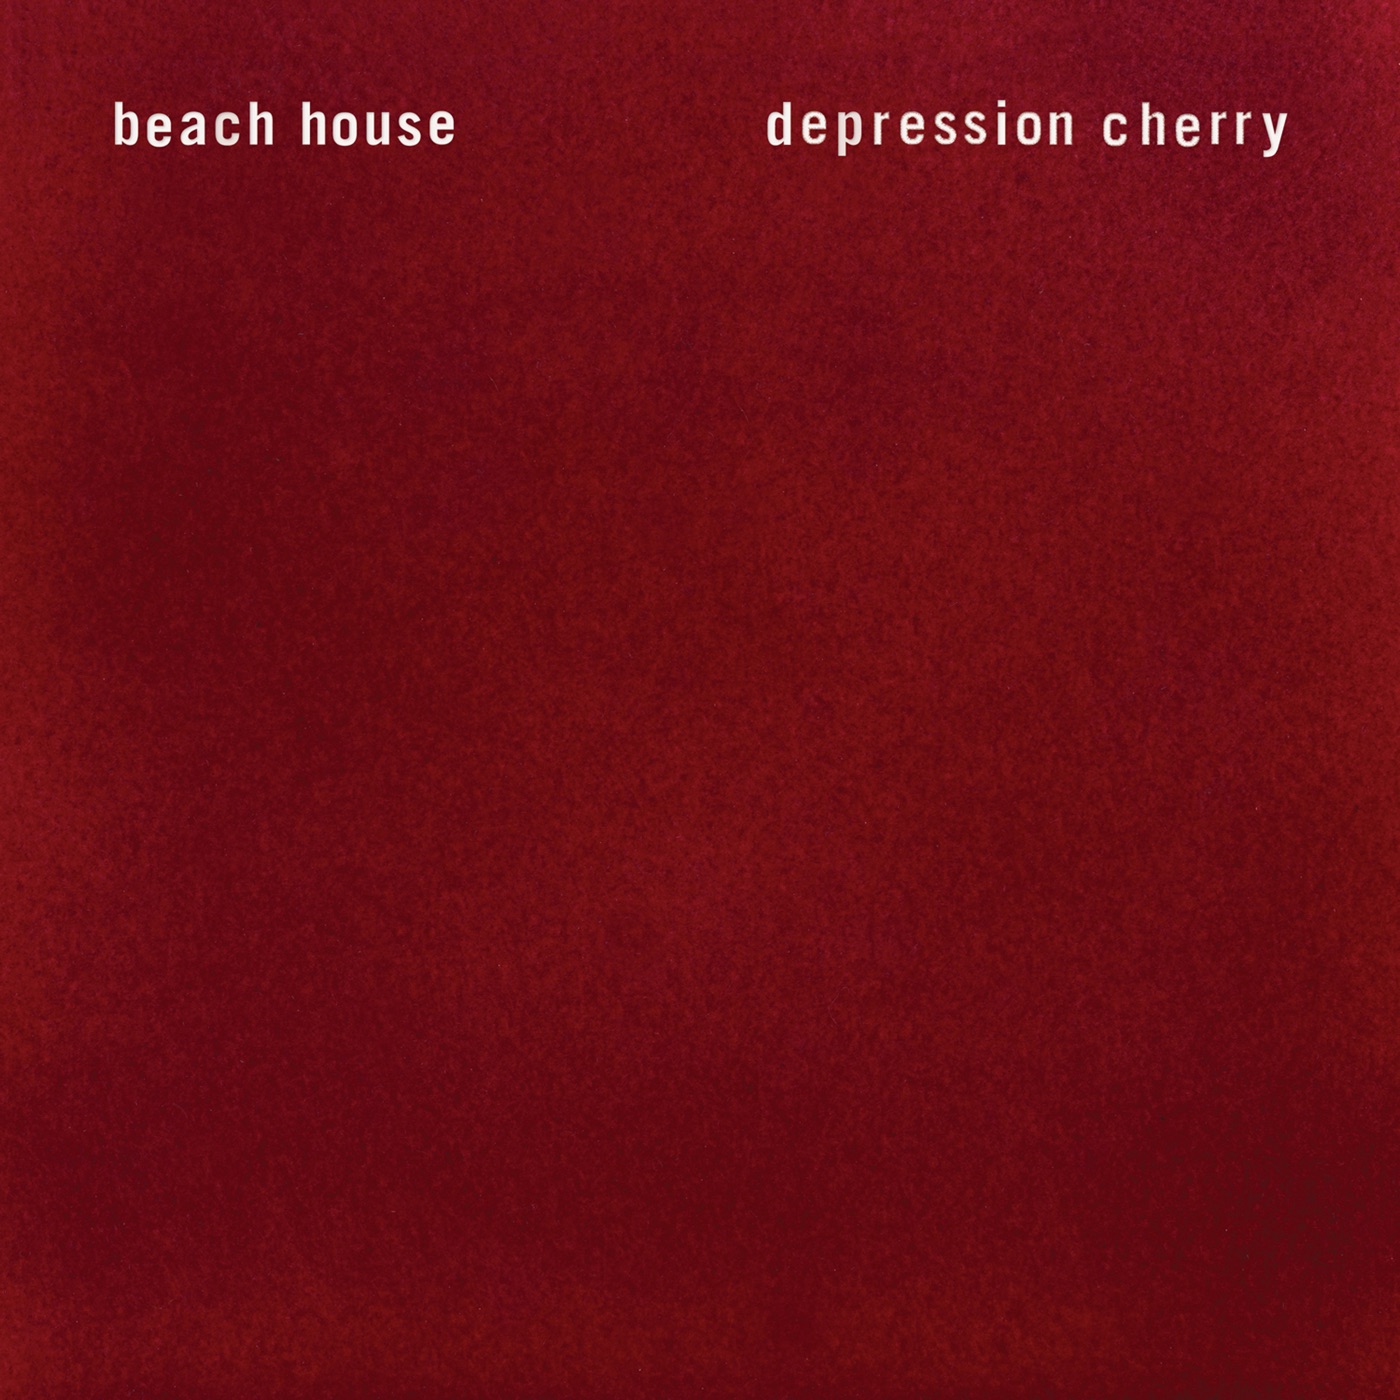 Depression Cherry by Beach House